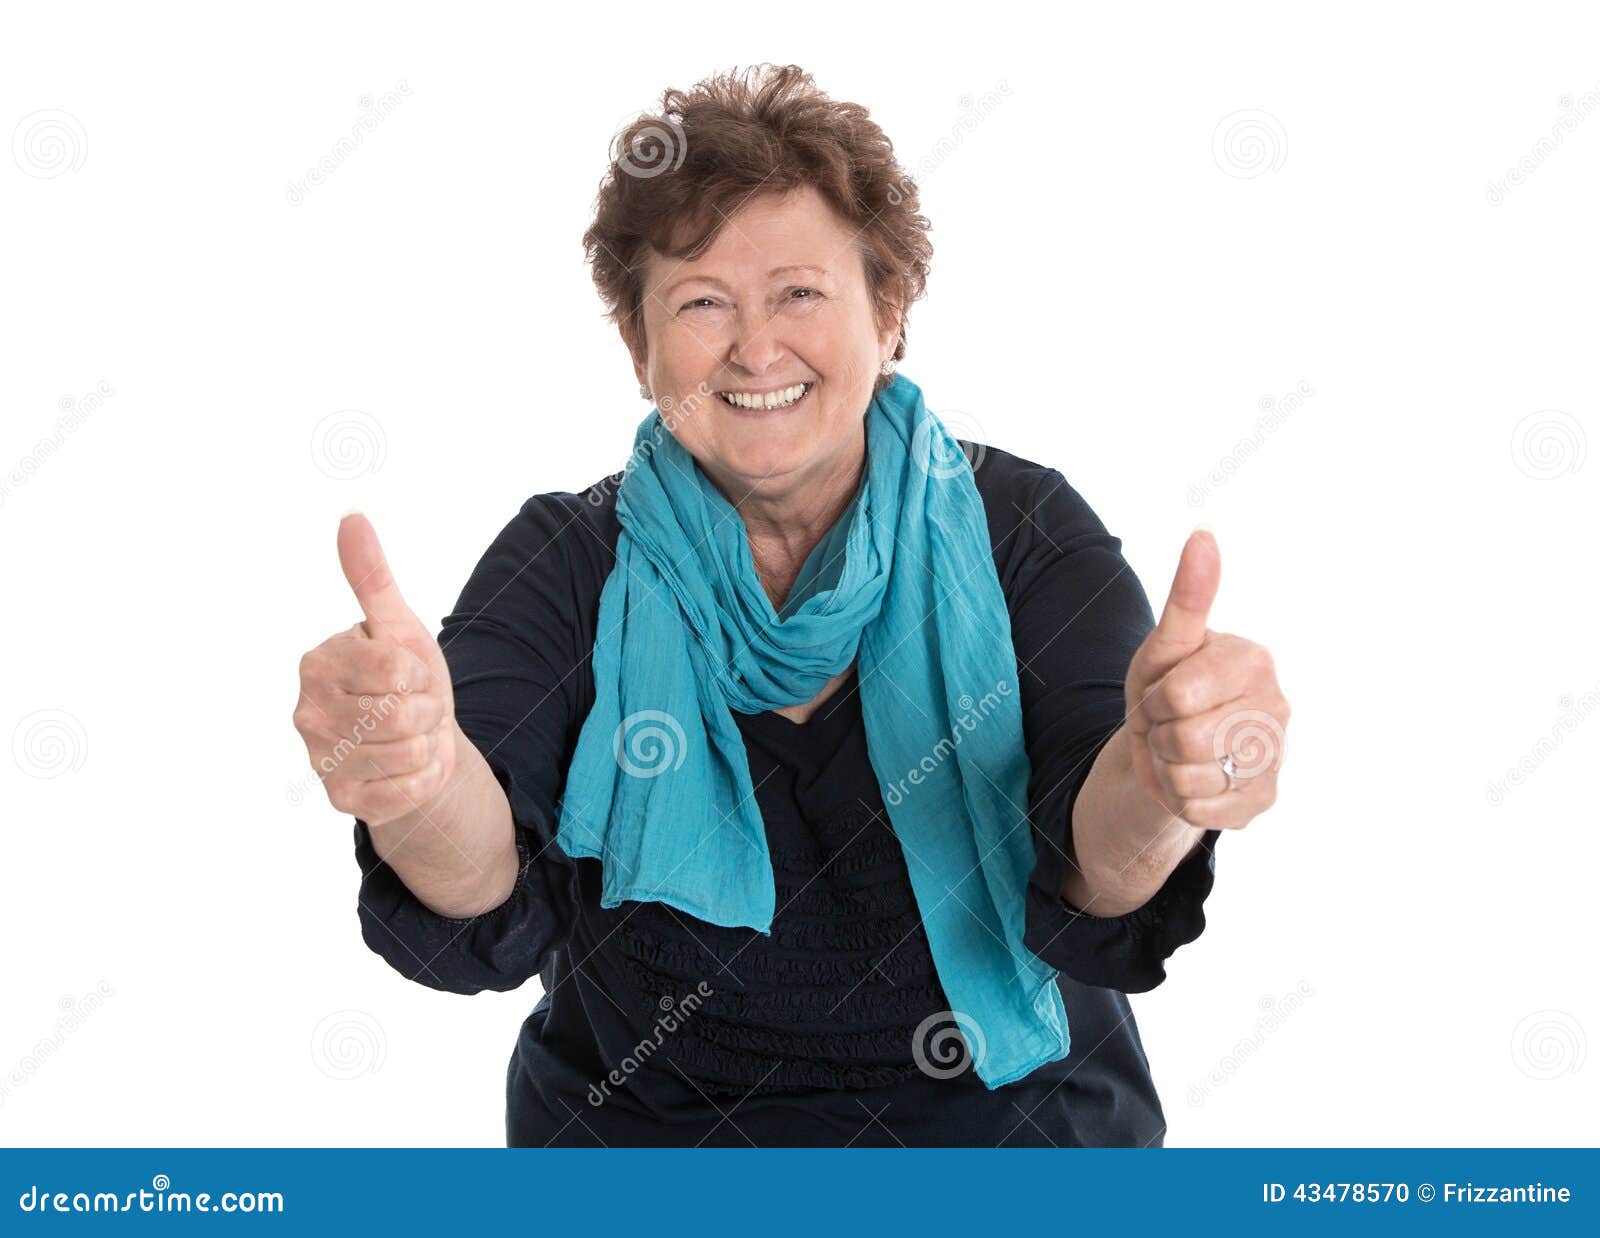 enthusiastic and happy grandmother making thumbs up gesture with